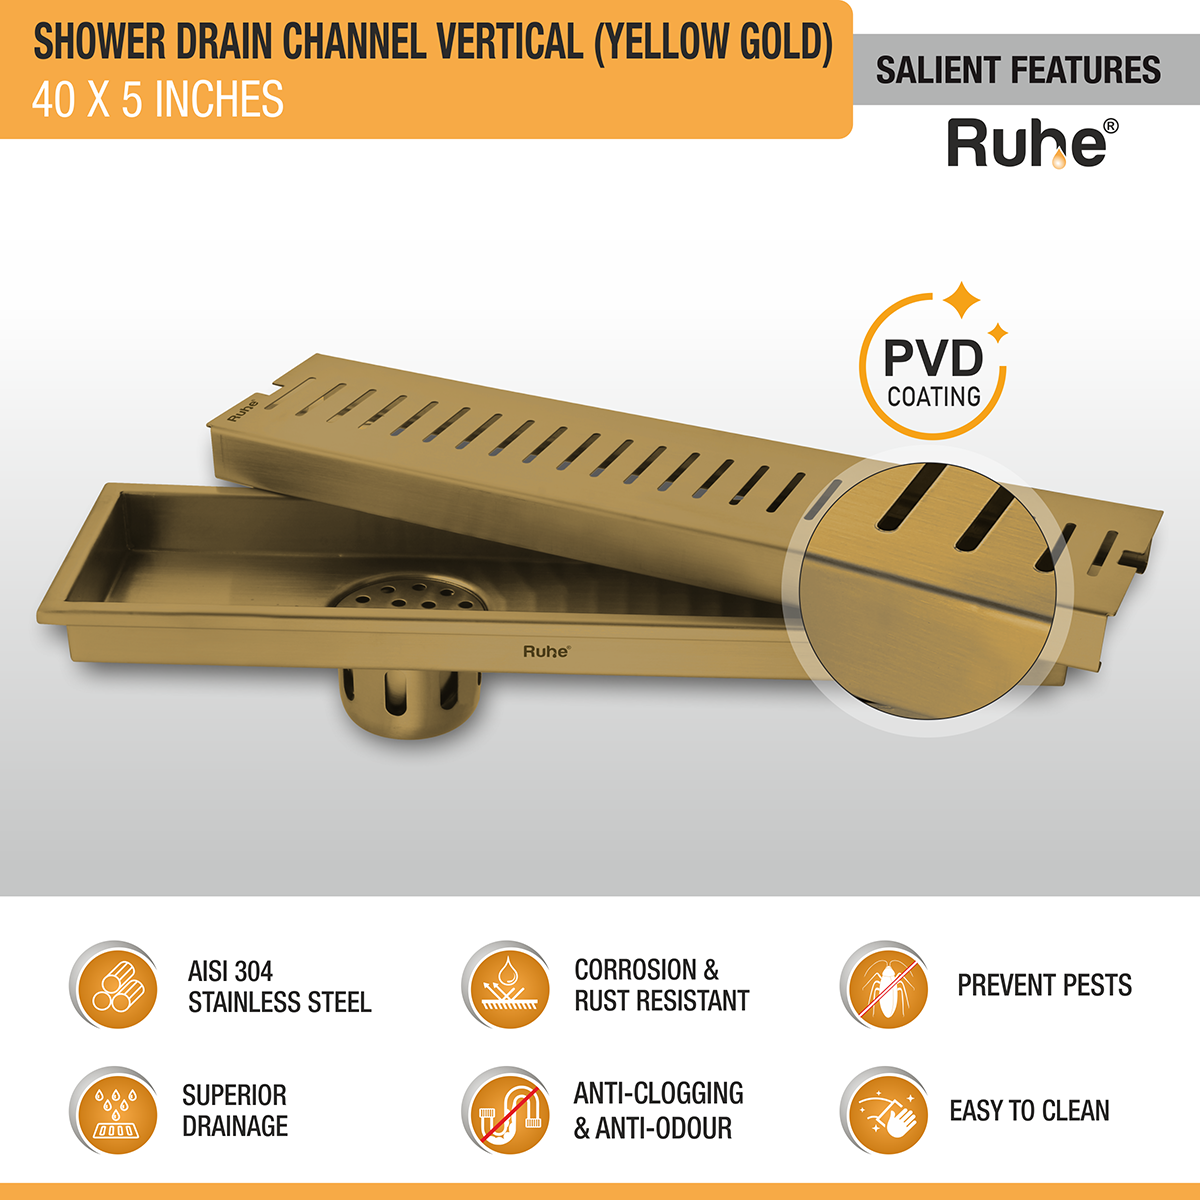 Vertical Shower Drain Channel (40 x 5 Inches) YELLOW GOLD features